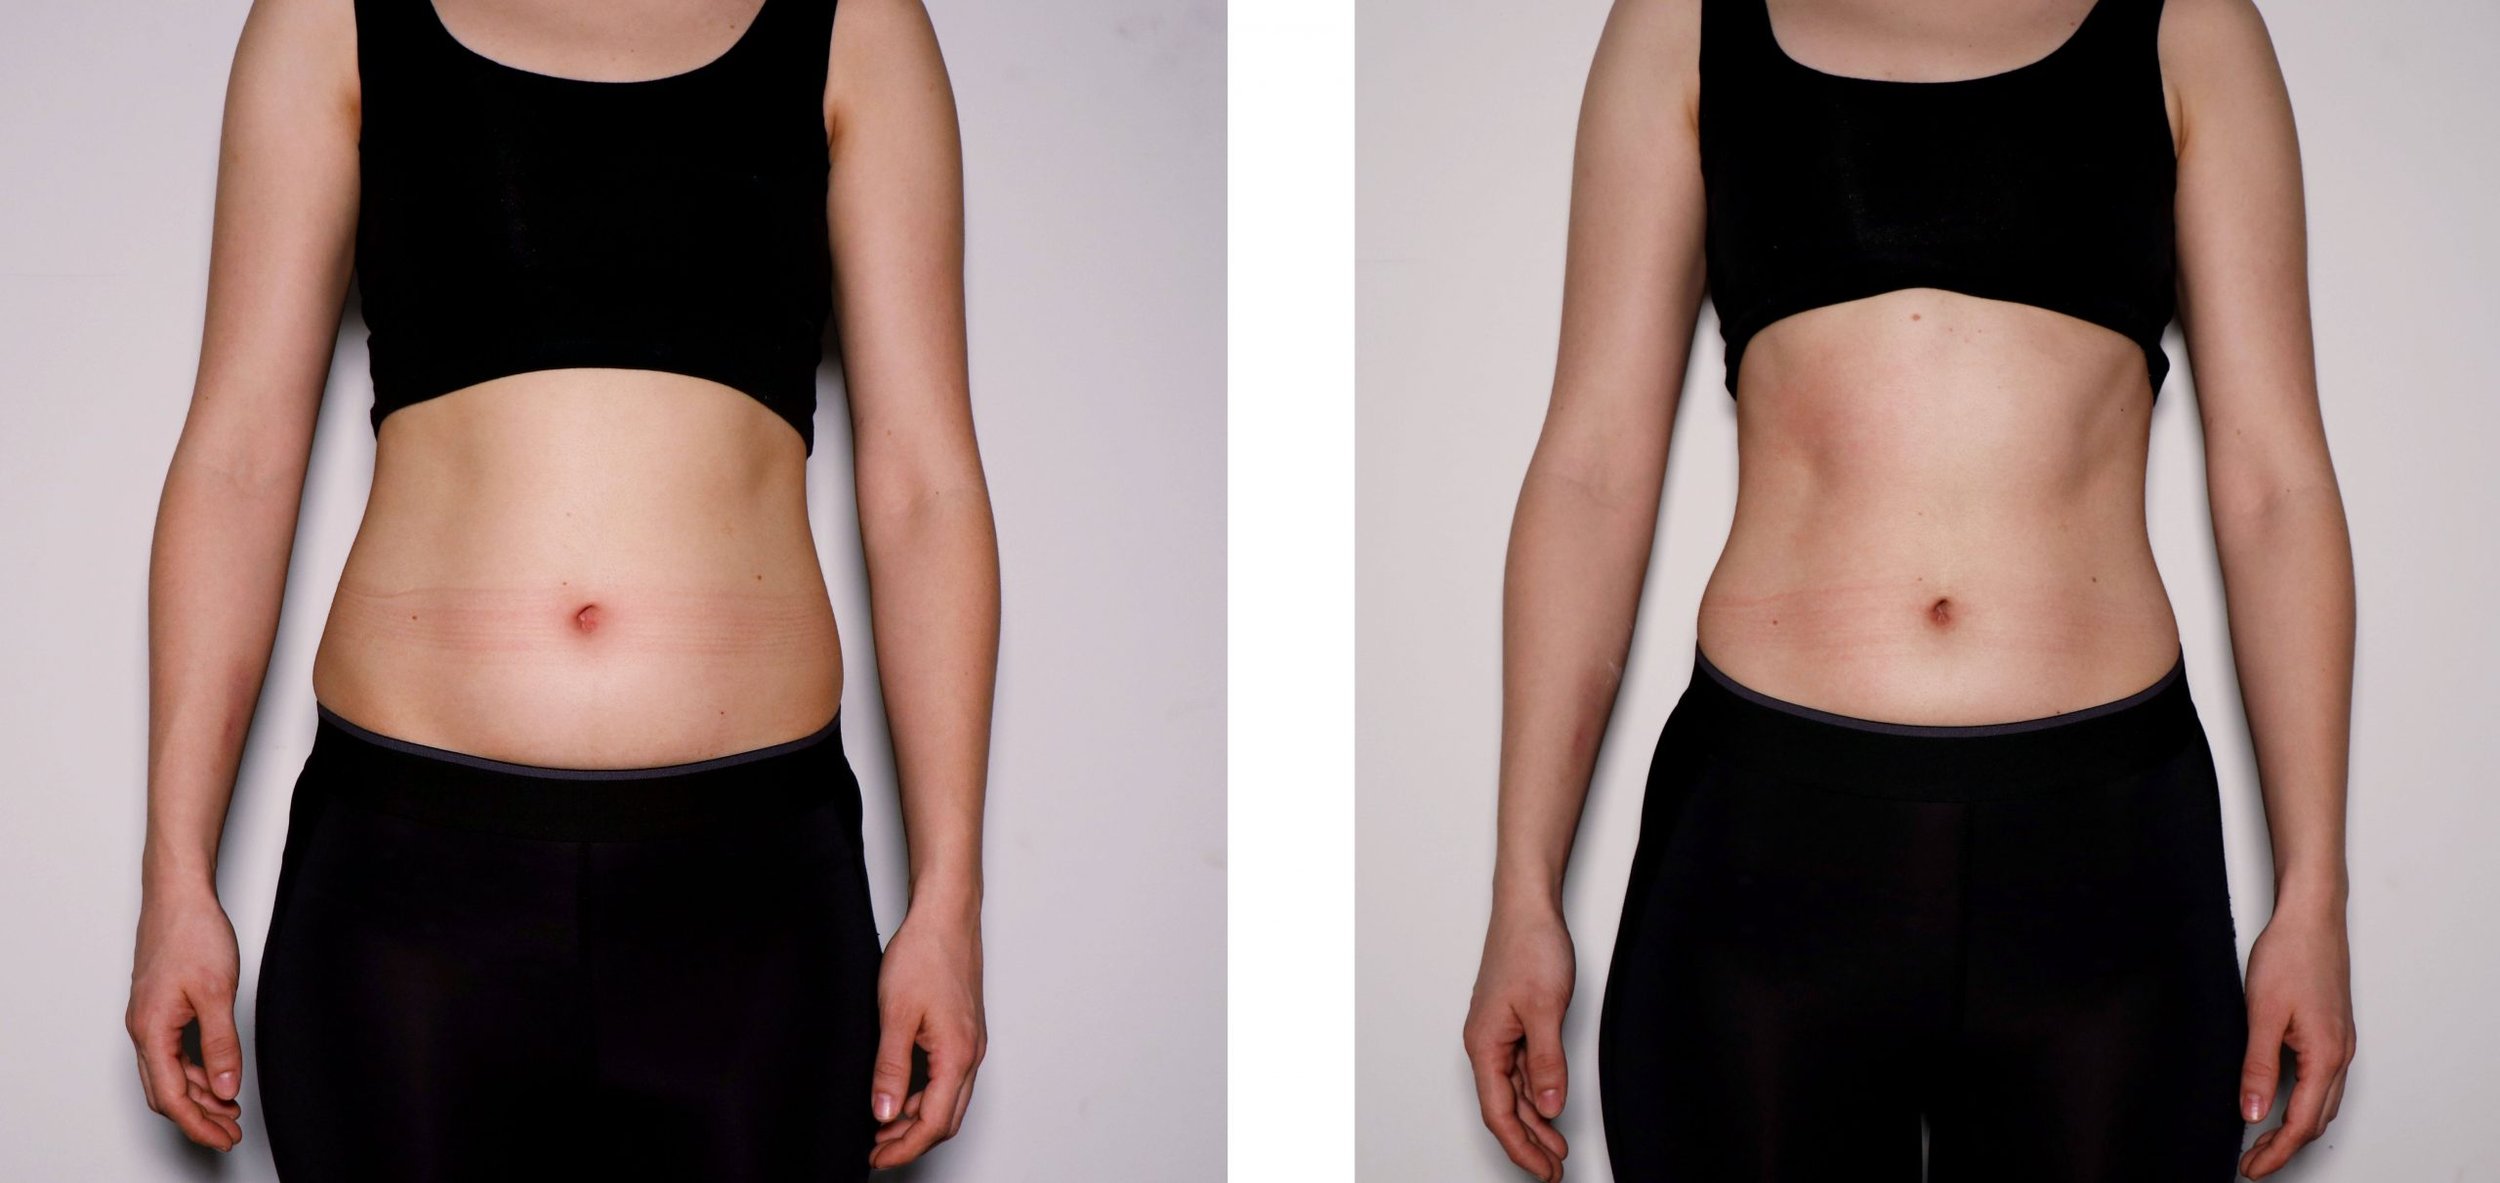 Female-Abdomen-Toning-Before-After-scaled.jpg